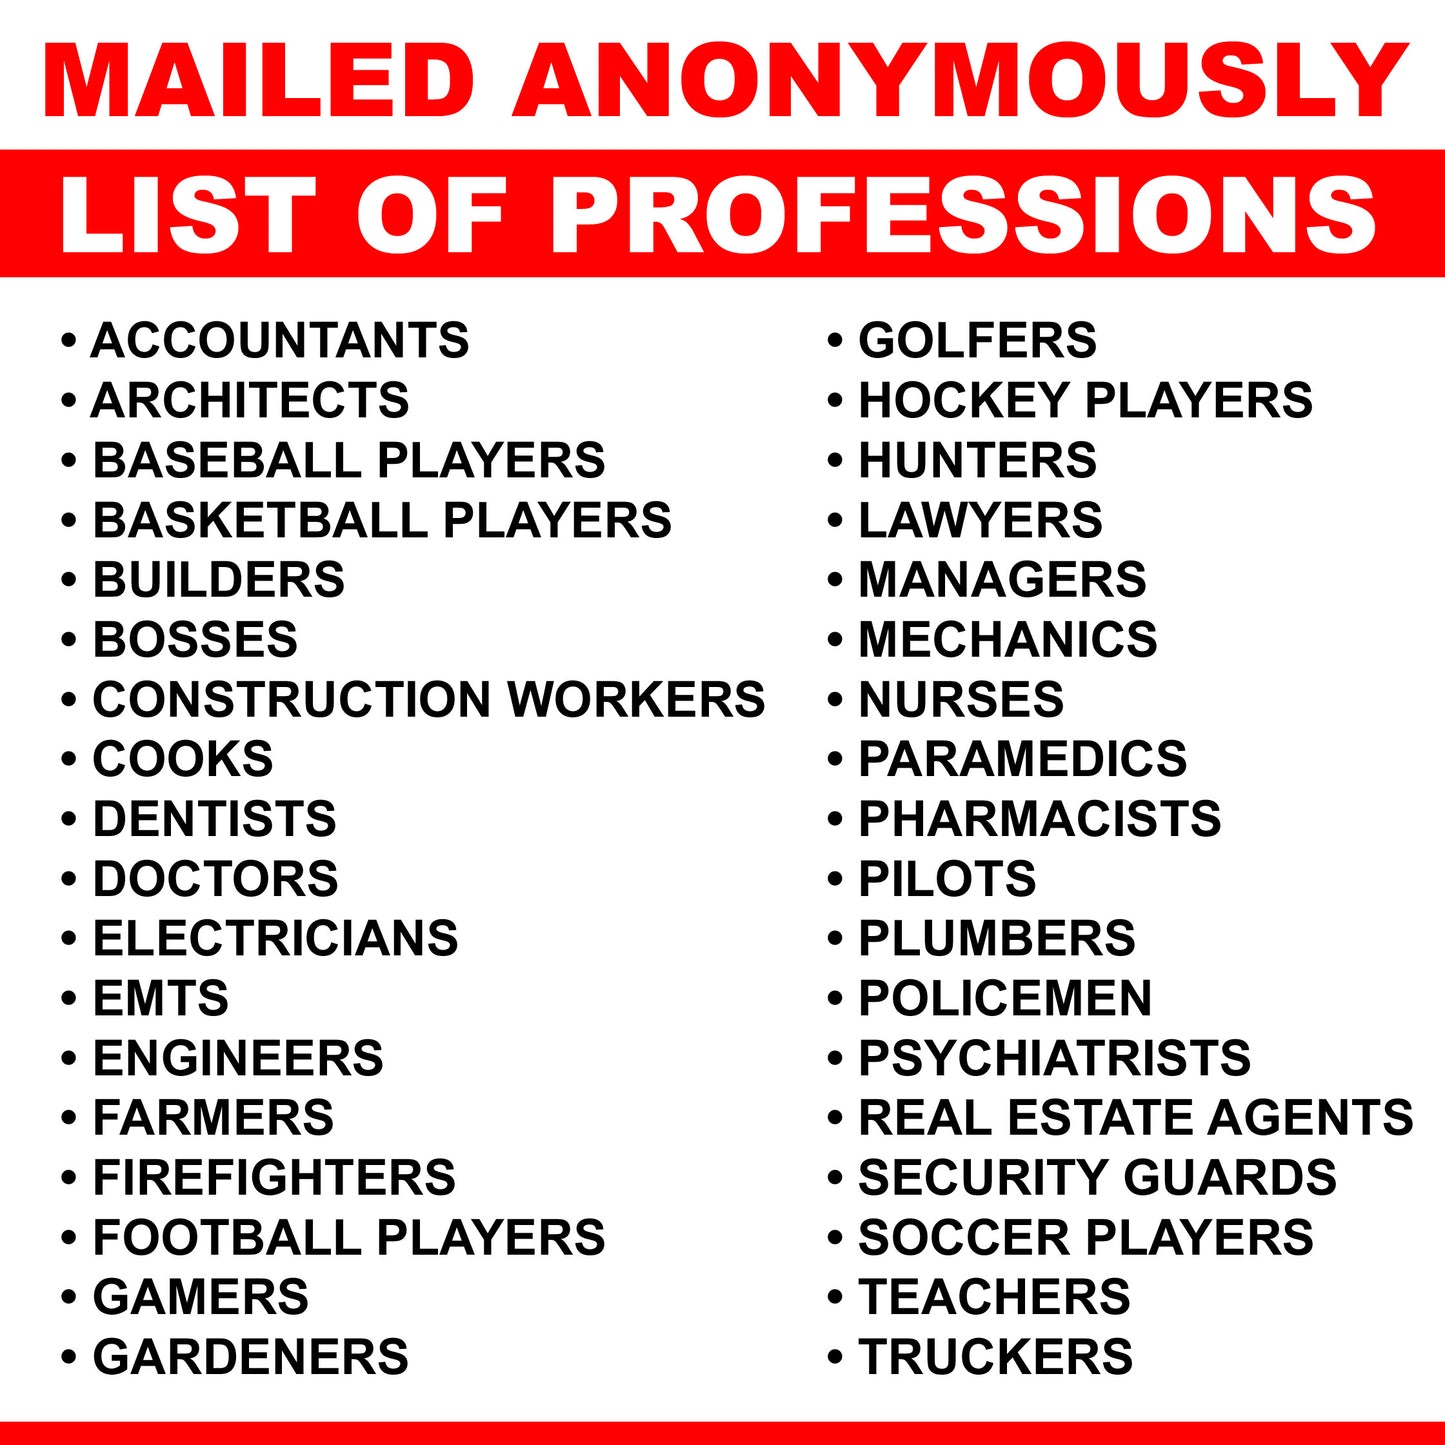 Profession, Trade, Hobby, Sports Prank, 36 to Choose from, gets mailed Directly to your Friends and Family to Embarrass them, Anonymously!